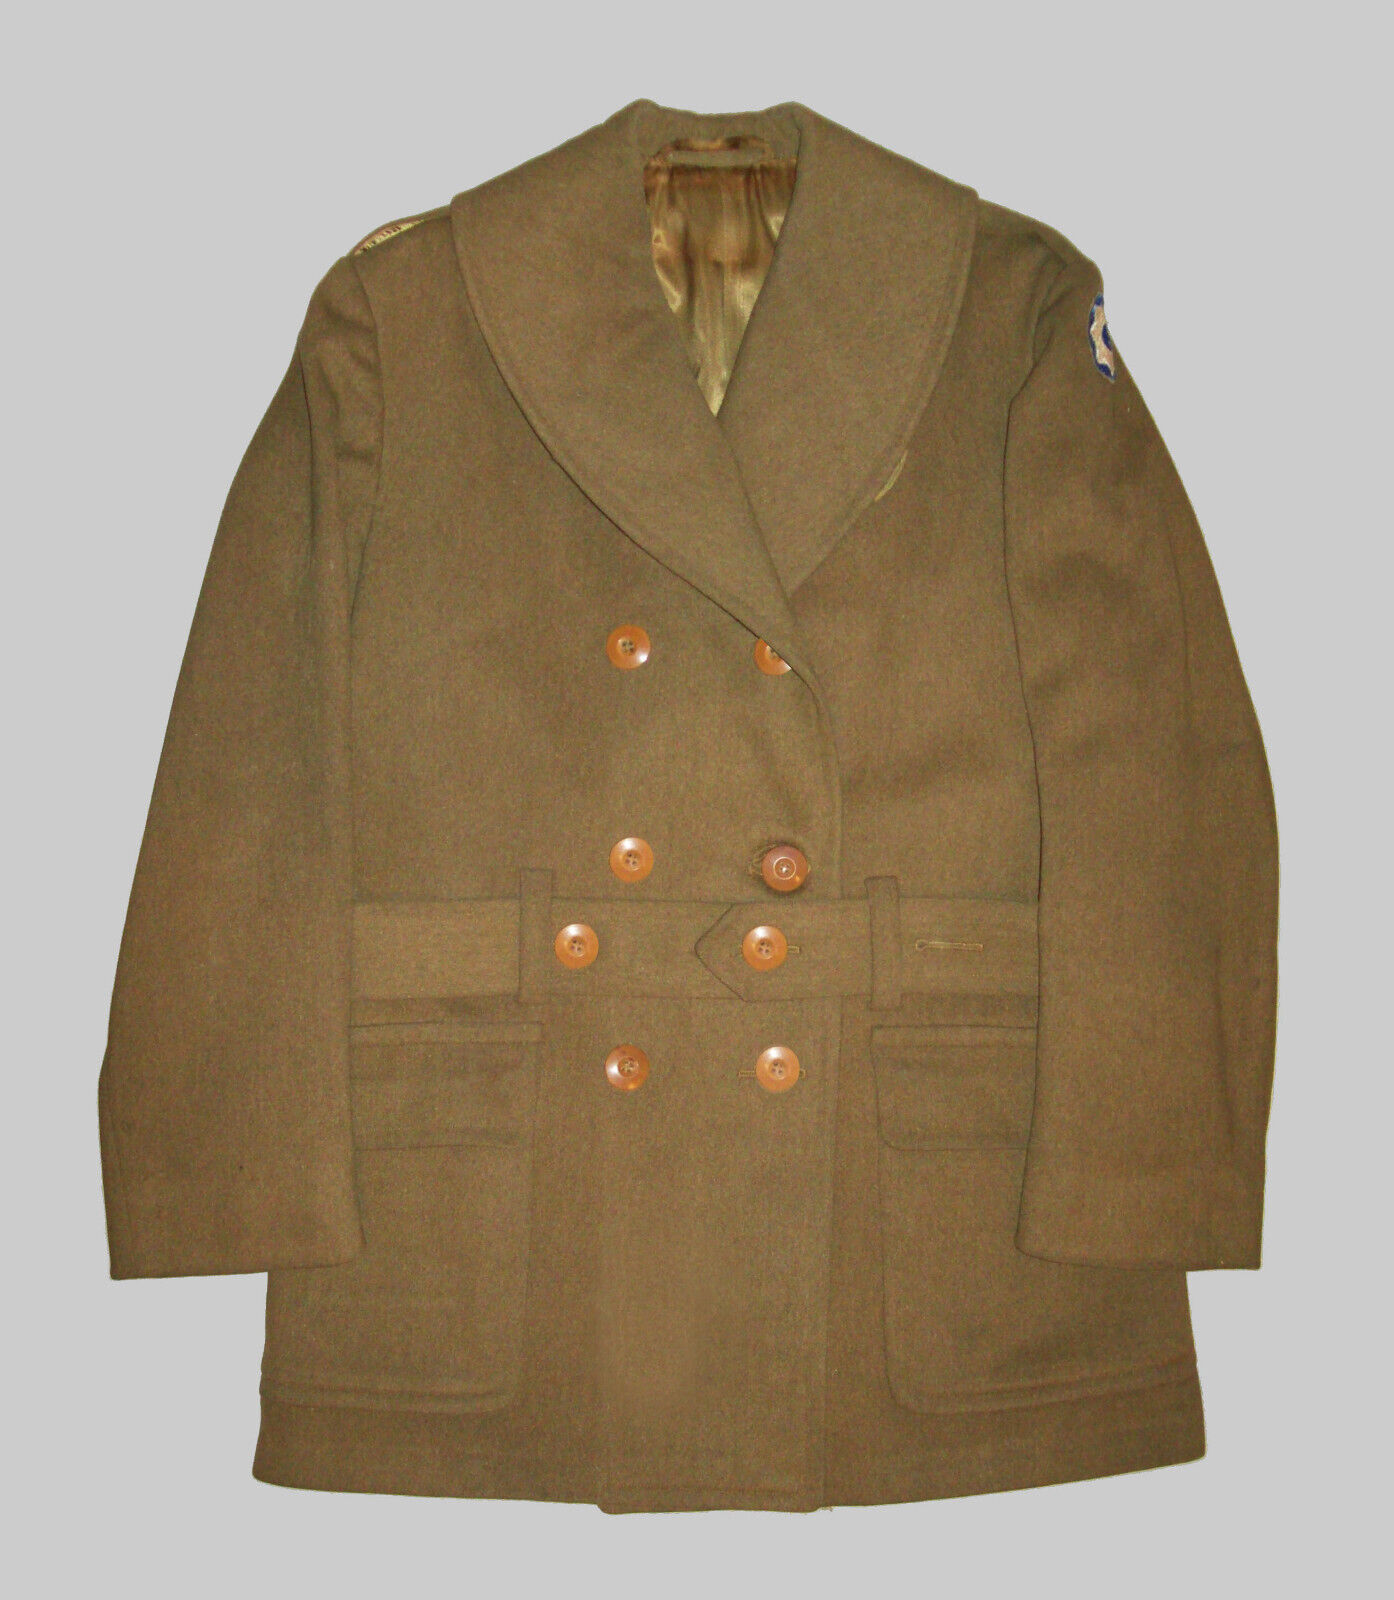 Old Original Vtg 1940\'s WWII Dated 1942 Wool Belted Jeep Jacket Mackinaw Nice